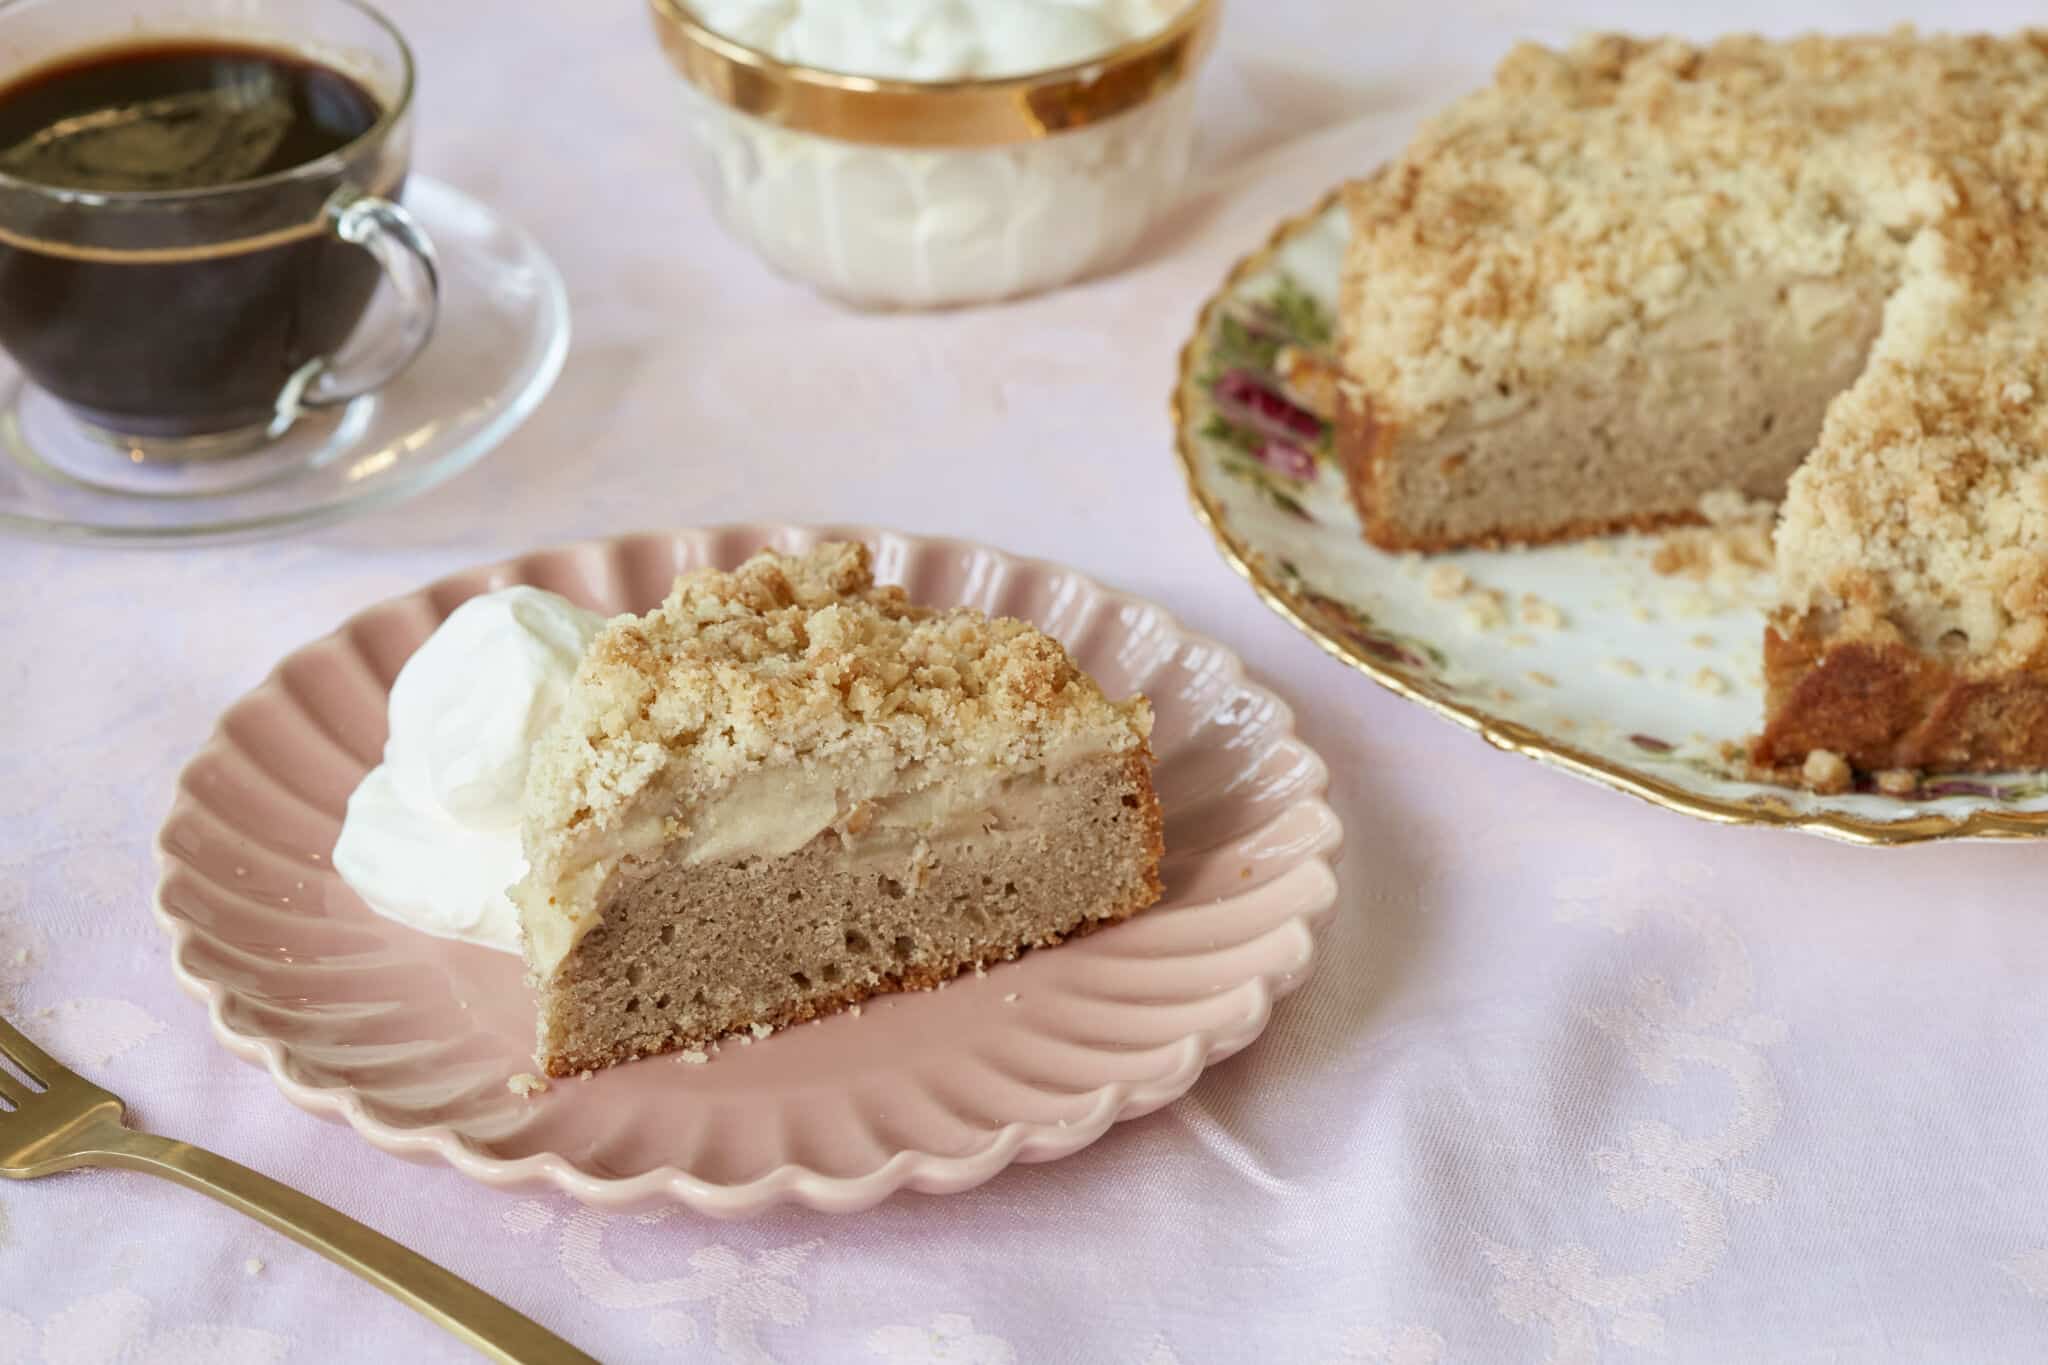 A close-up shot at a slice of Irish Apple Cake served on a dessert plate in the front shows the moist soft cake layer, the sweet apple layer and the crumbly topping. The rest of the cake is on the big platter and a cup of coffee is next to it.